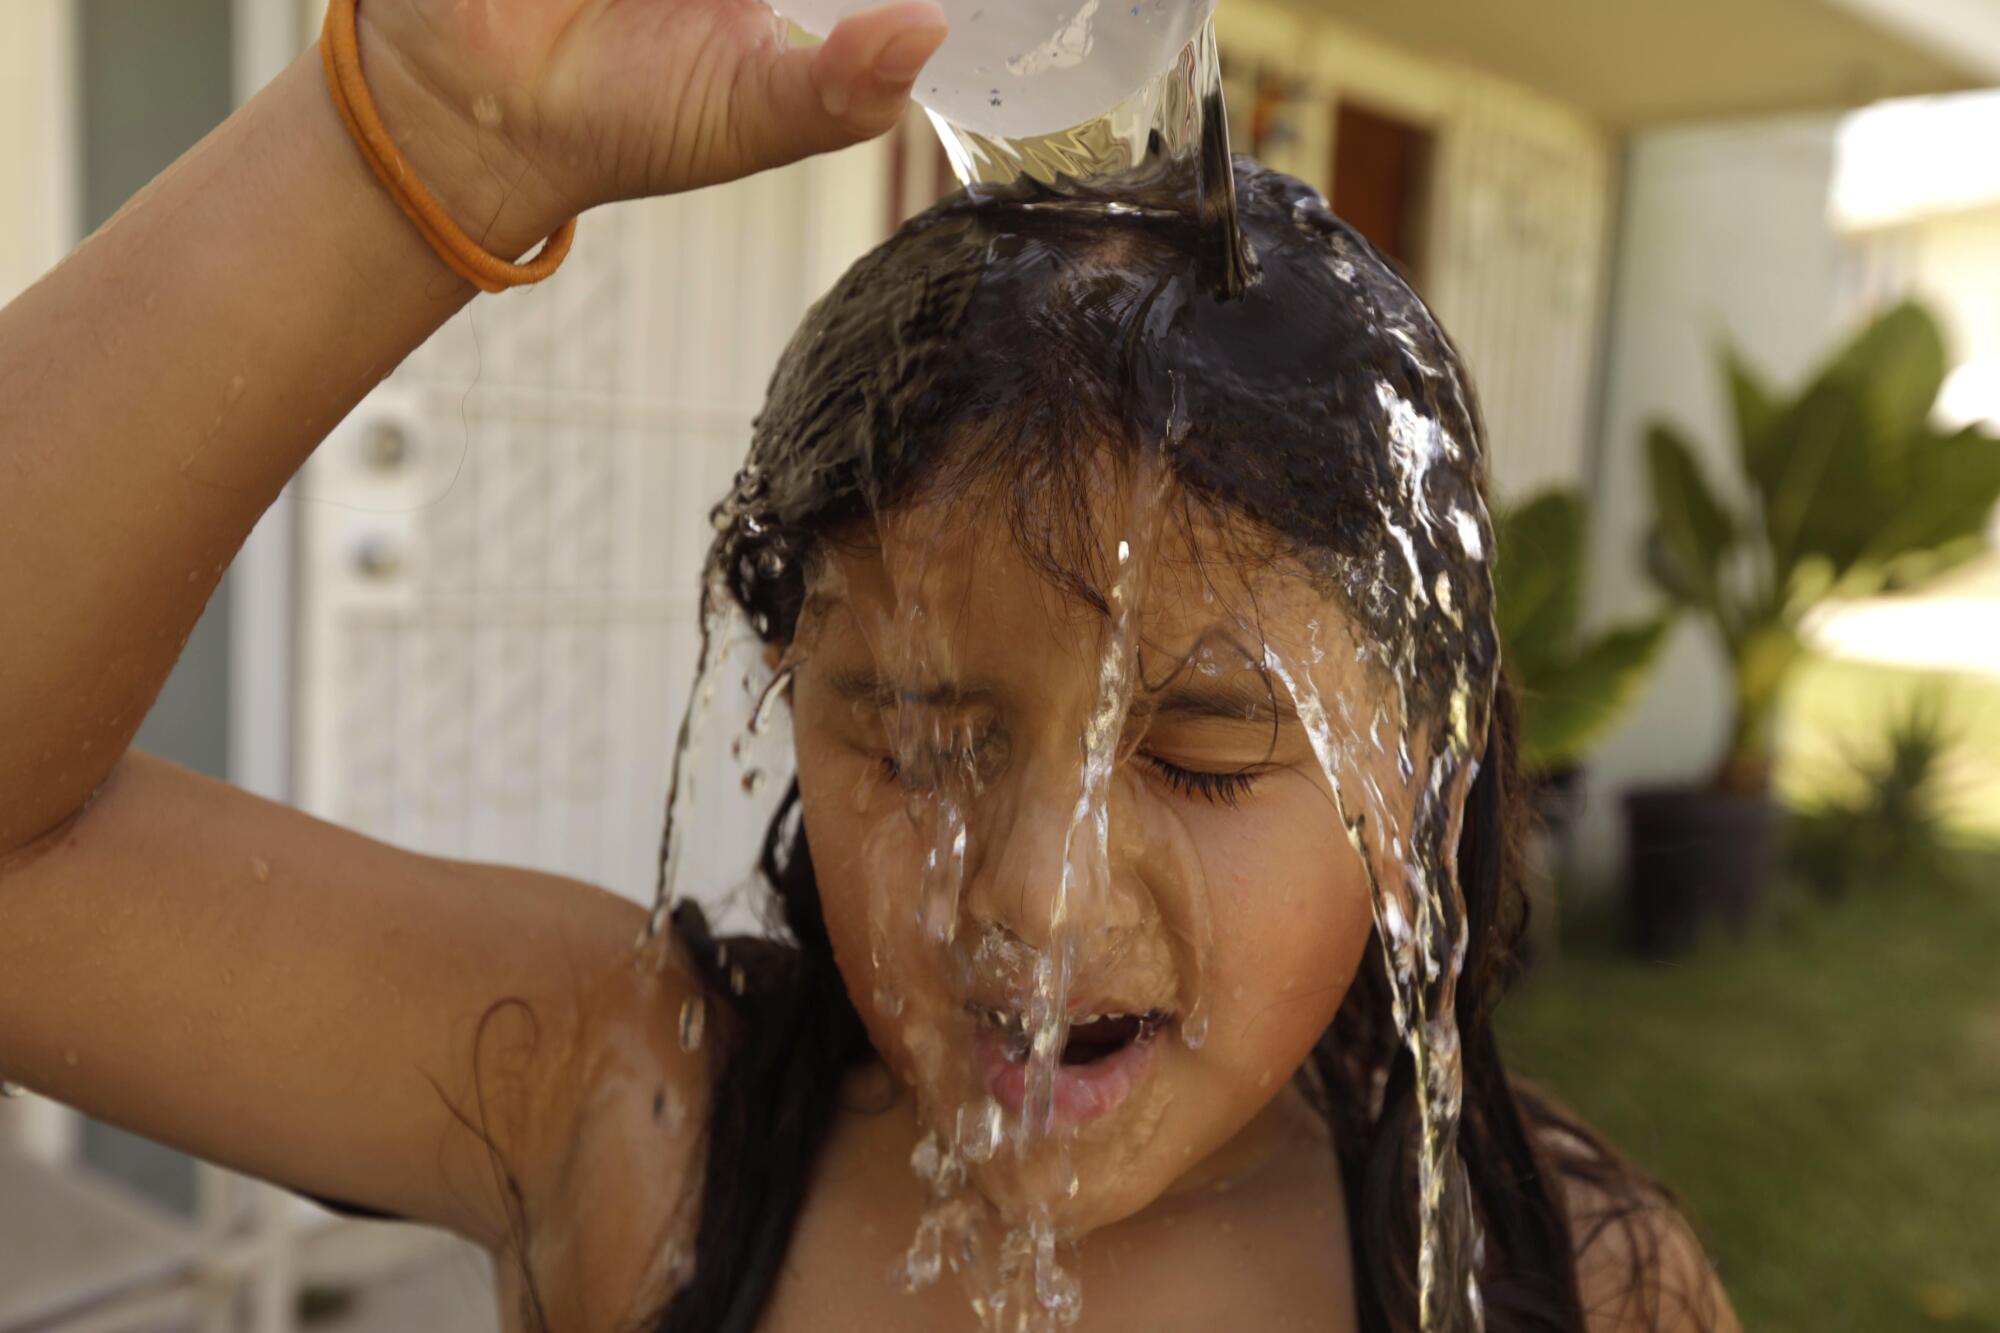 Leanna Ayala pours a cup of water over her head